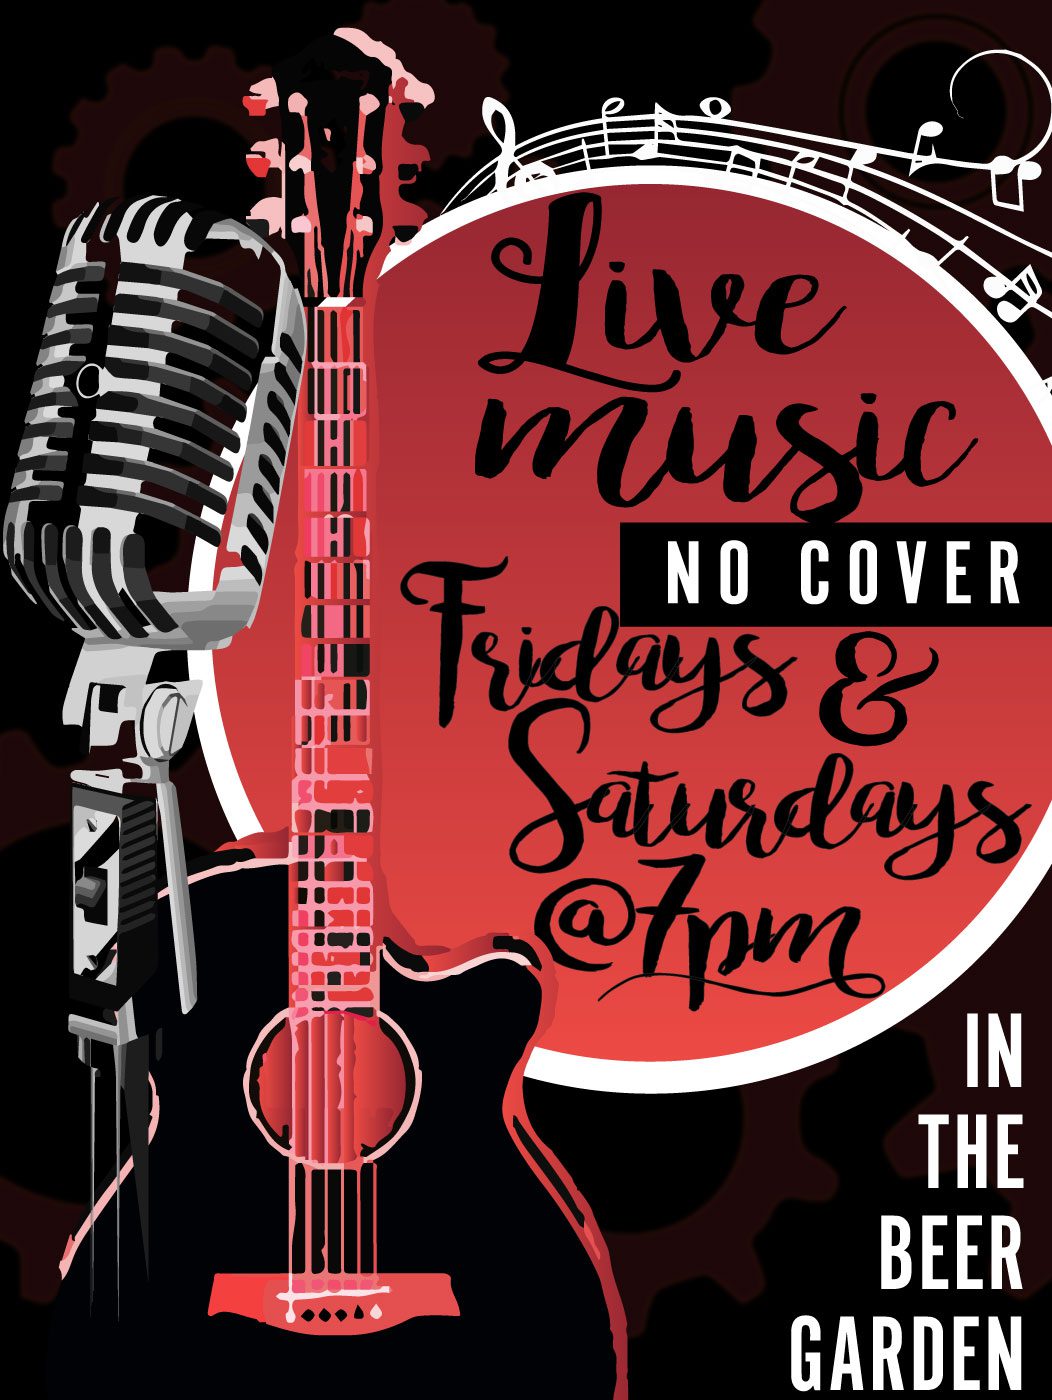 Motorworks Brewing presents Live Music every Friday and Saturday @ 7:00 pm EST